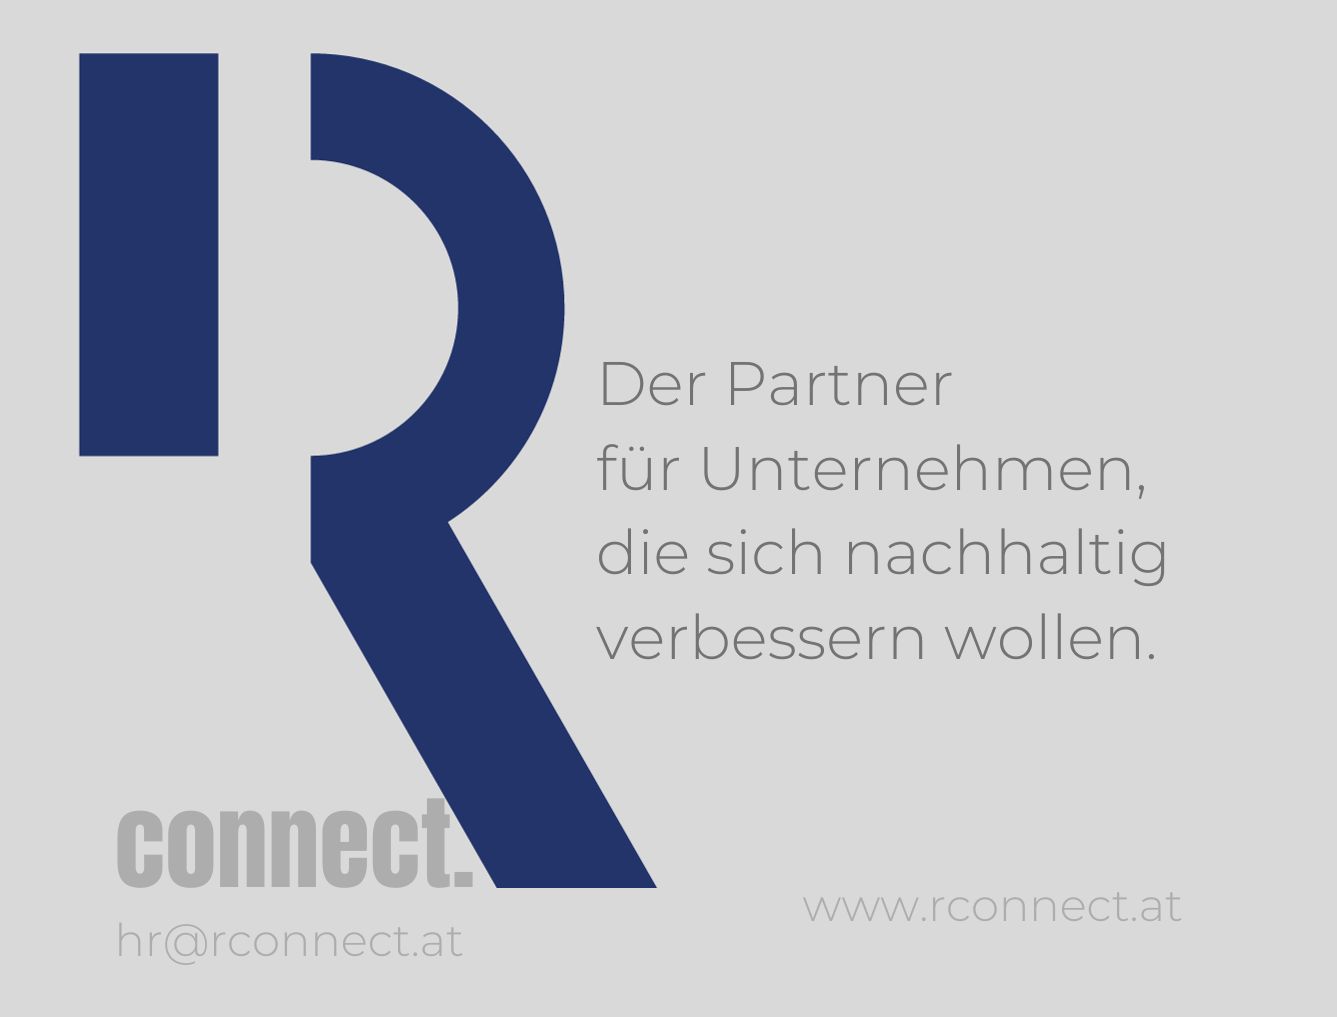 Rconnect